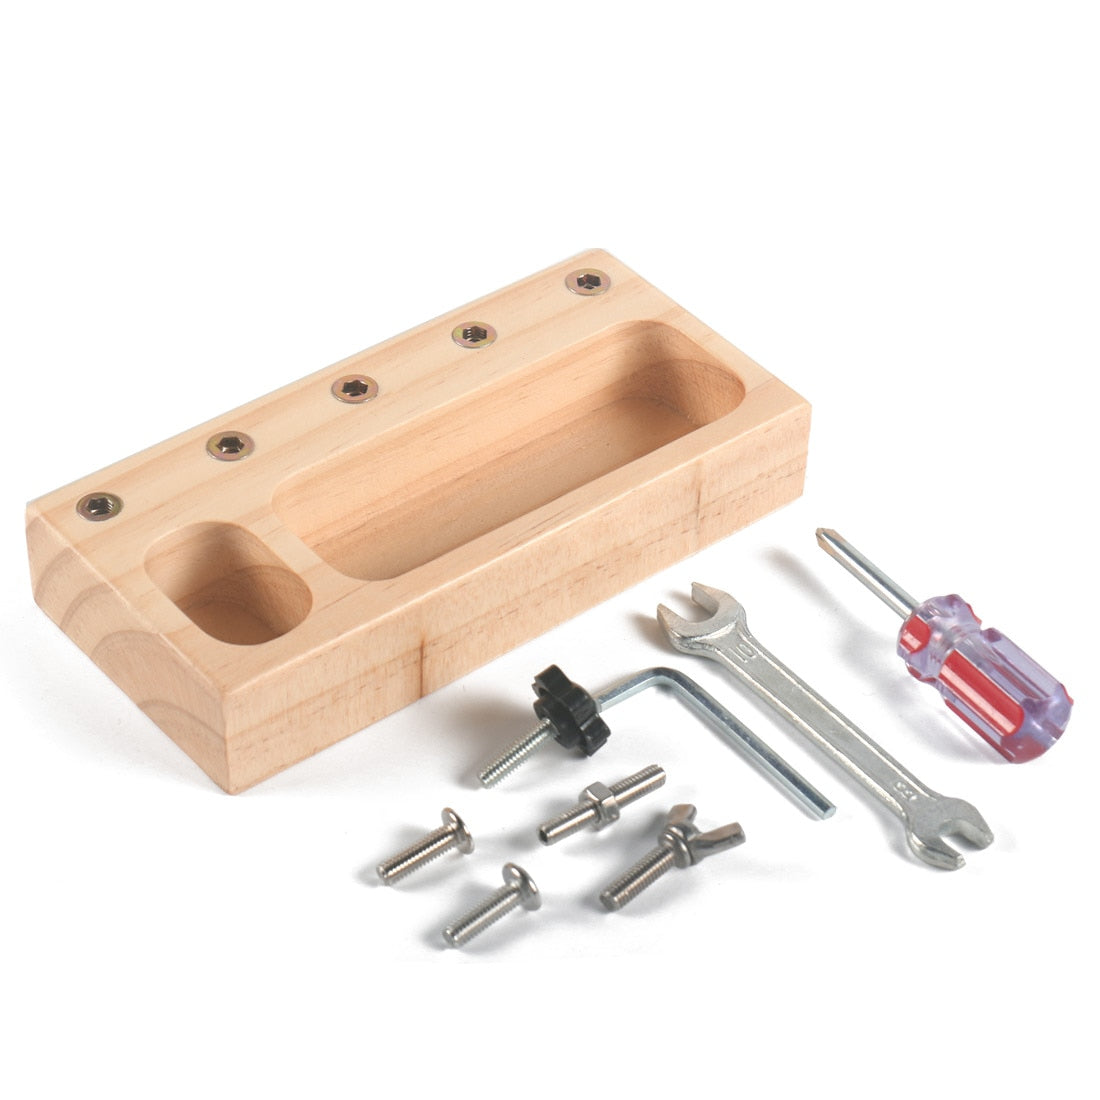 Wooden Montessori Screw Bolts and Screwdriver Set - Educational Sensory Toy for Fine Motor Skill Learning